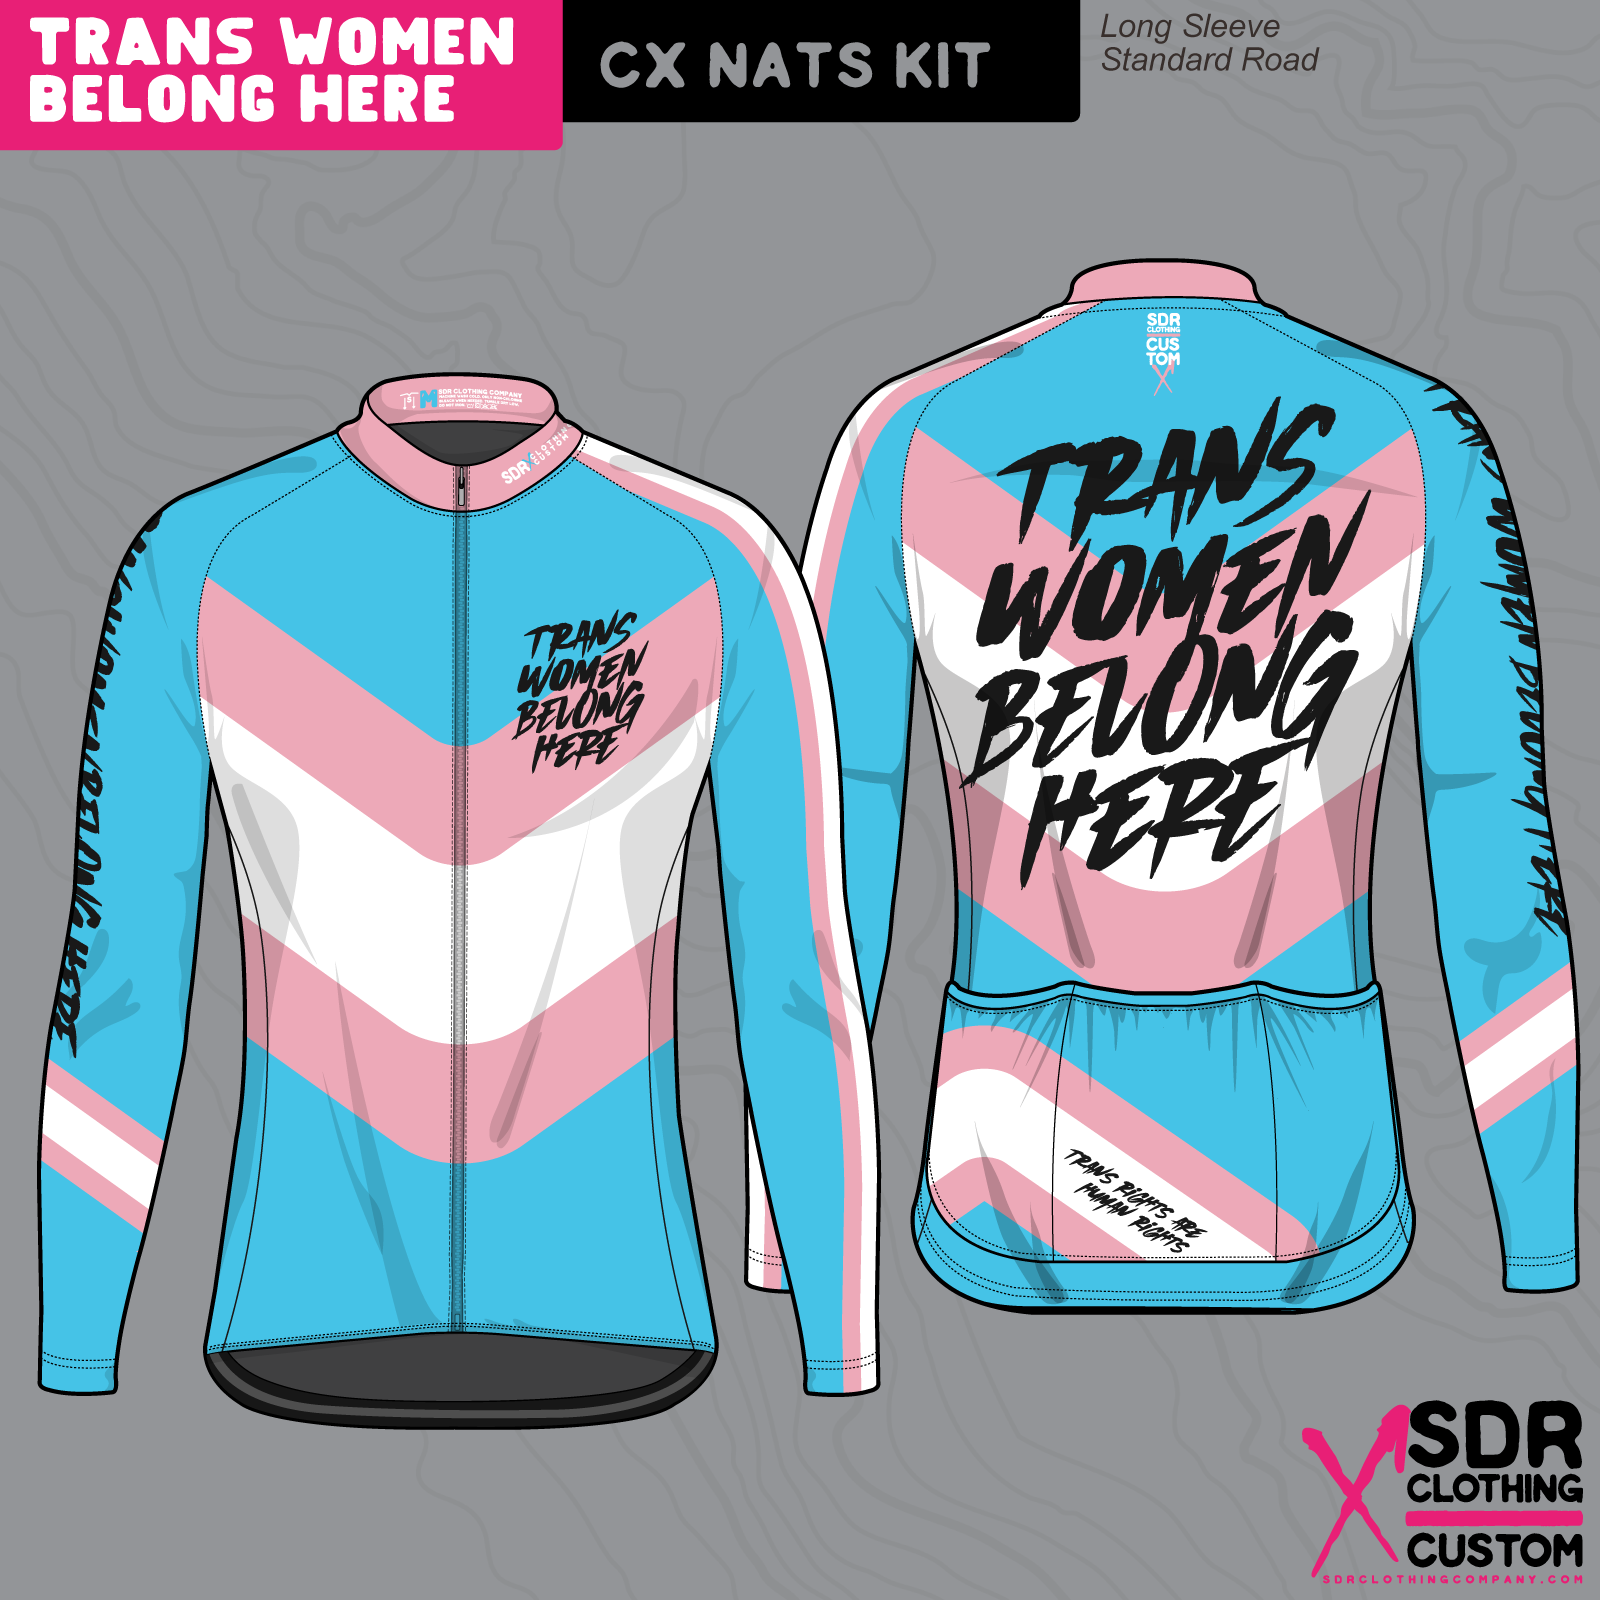 Cyclocross Nationals Jersey Campaign